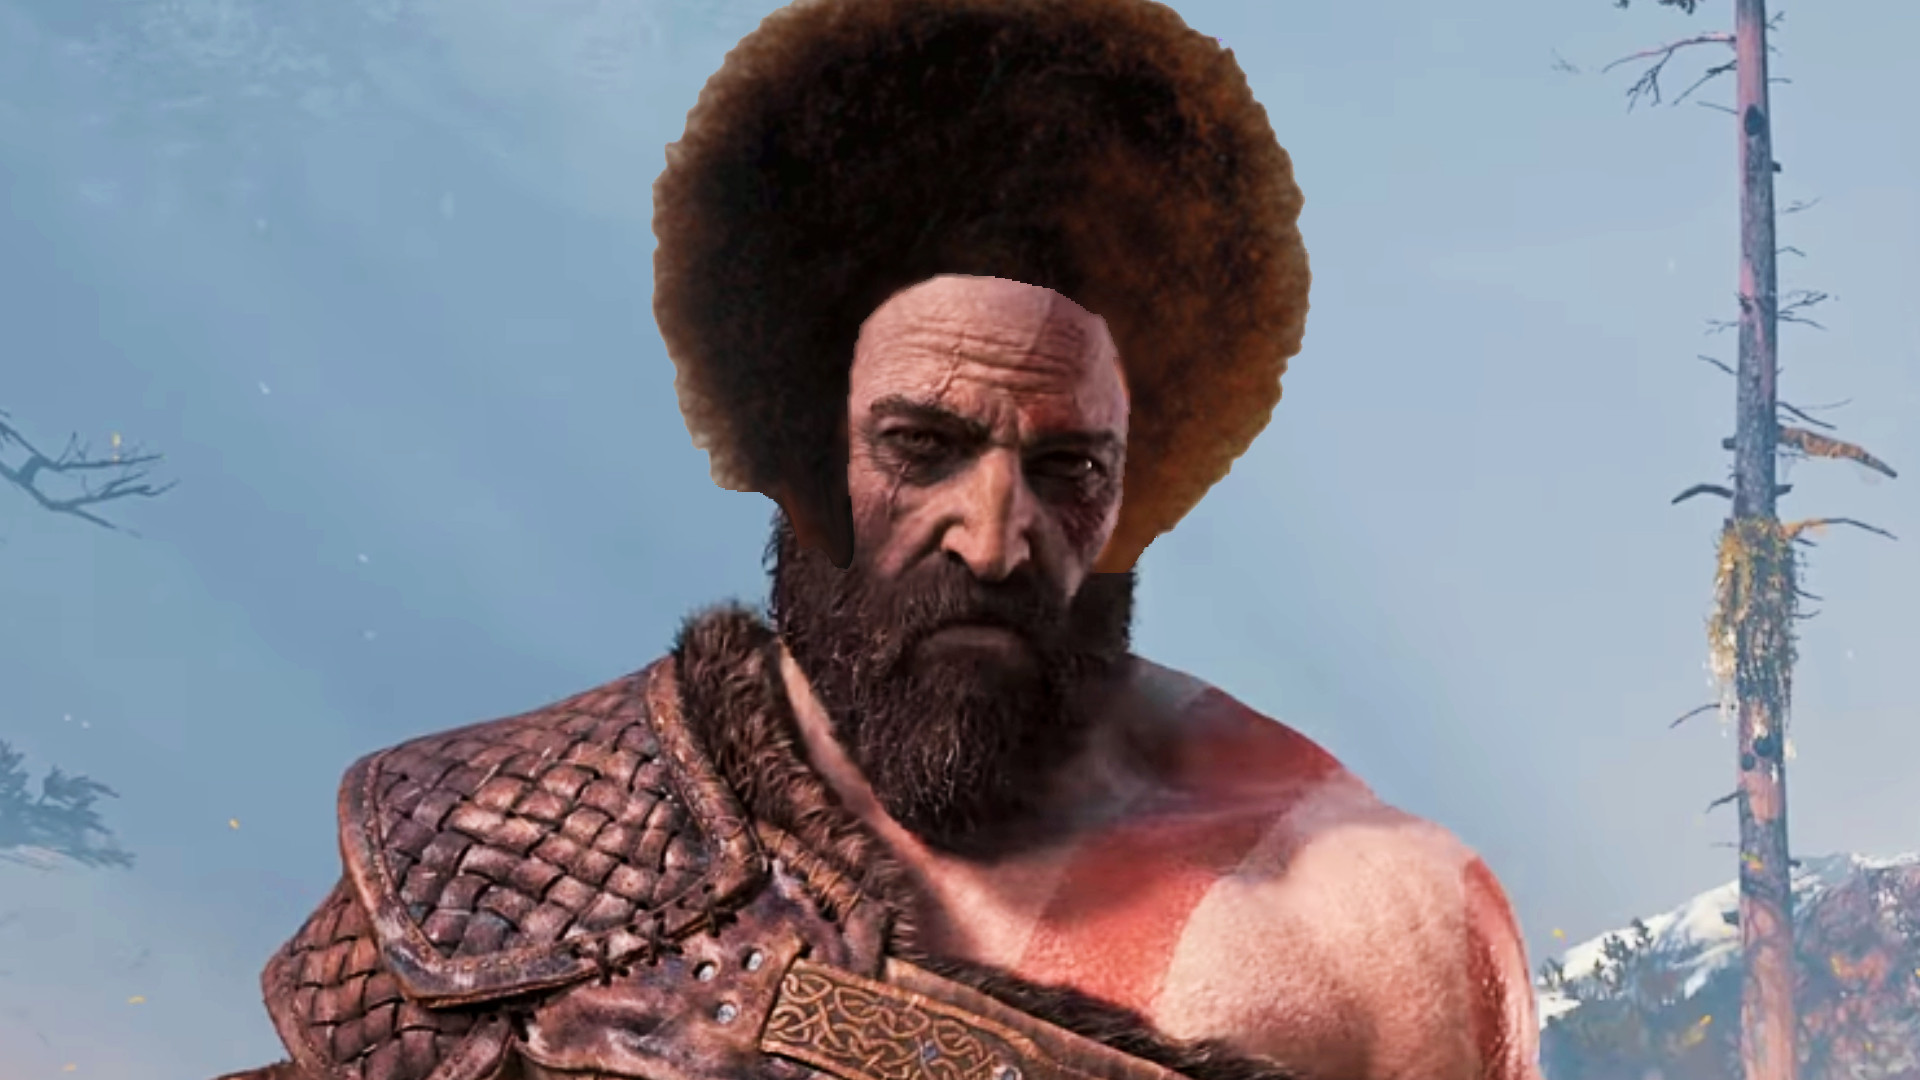 Bob Ross x God of War cosplay is the perfect weird crossover